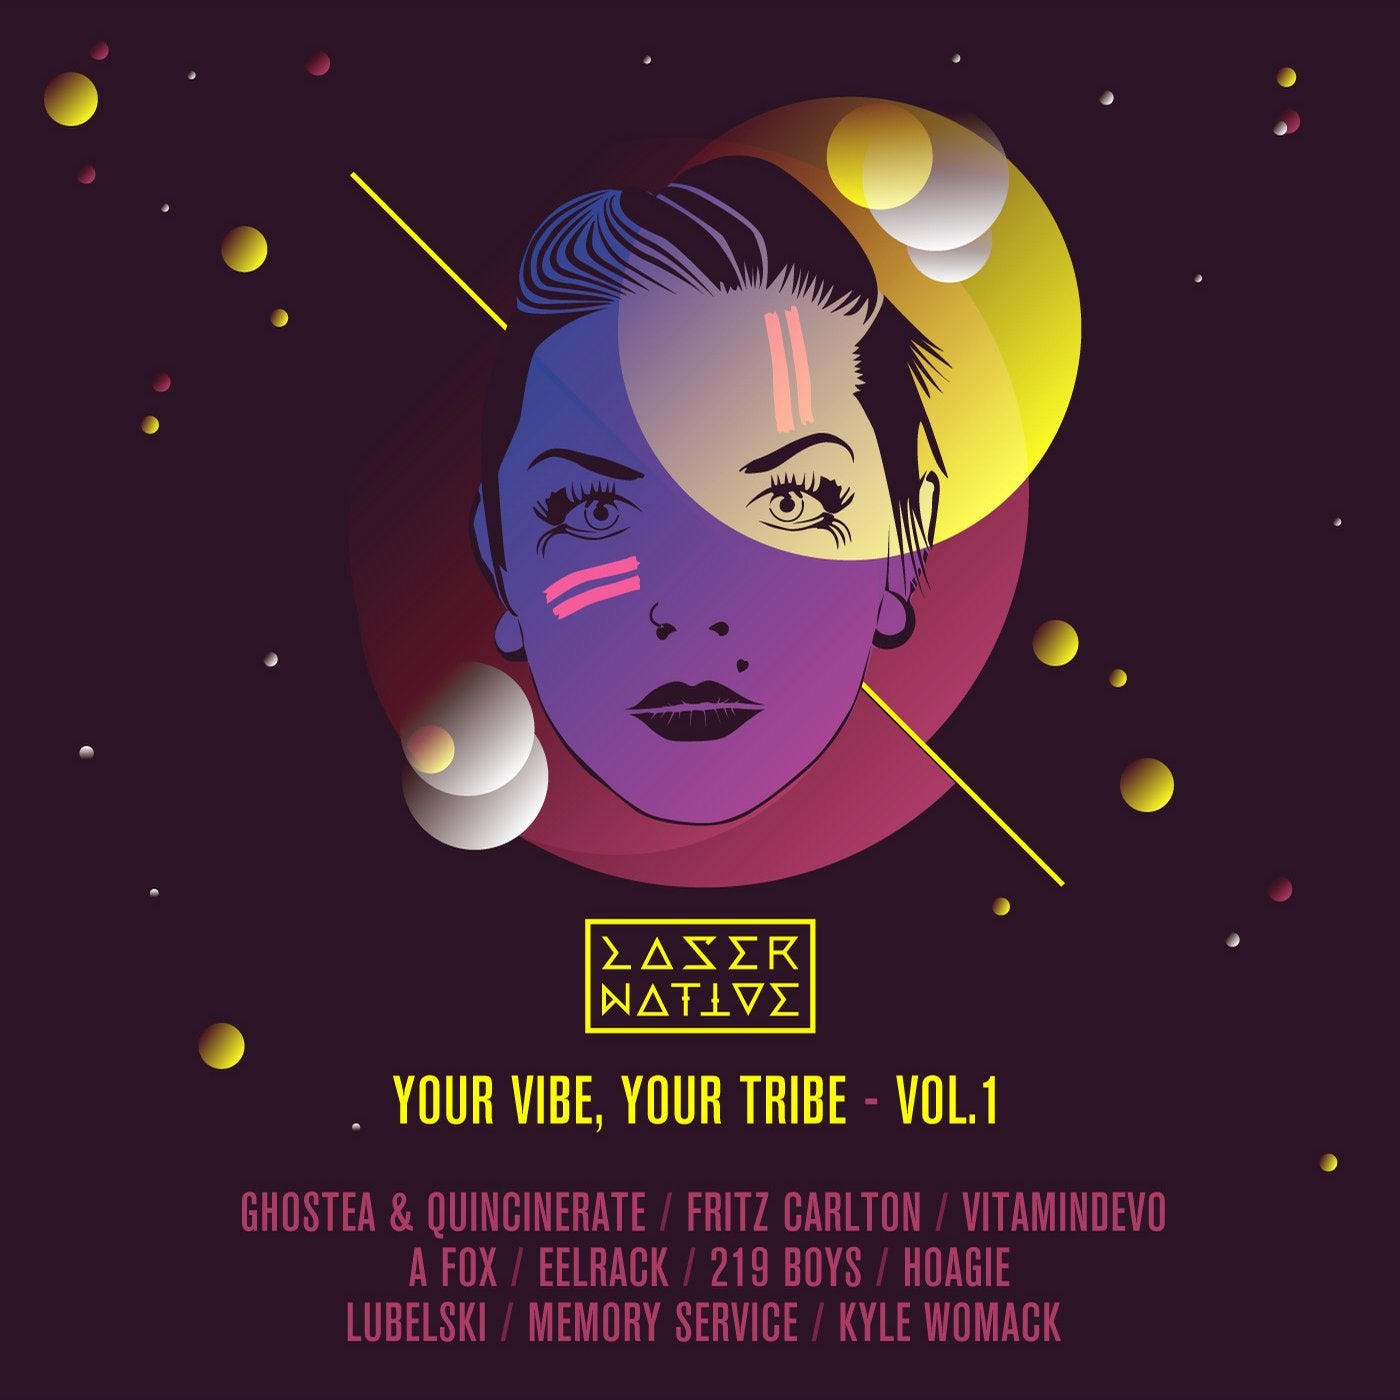 Your Vibe, Your Tribe - Vol. 1